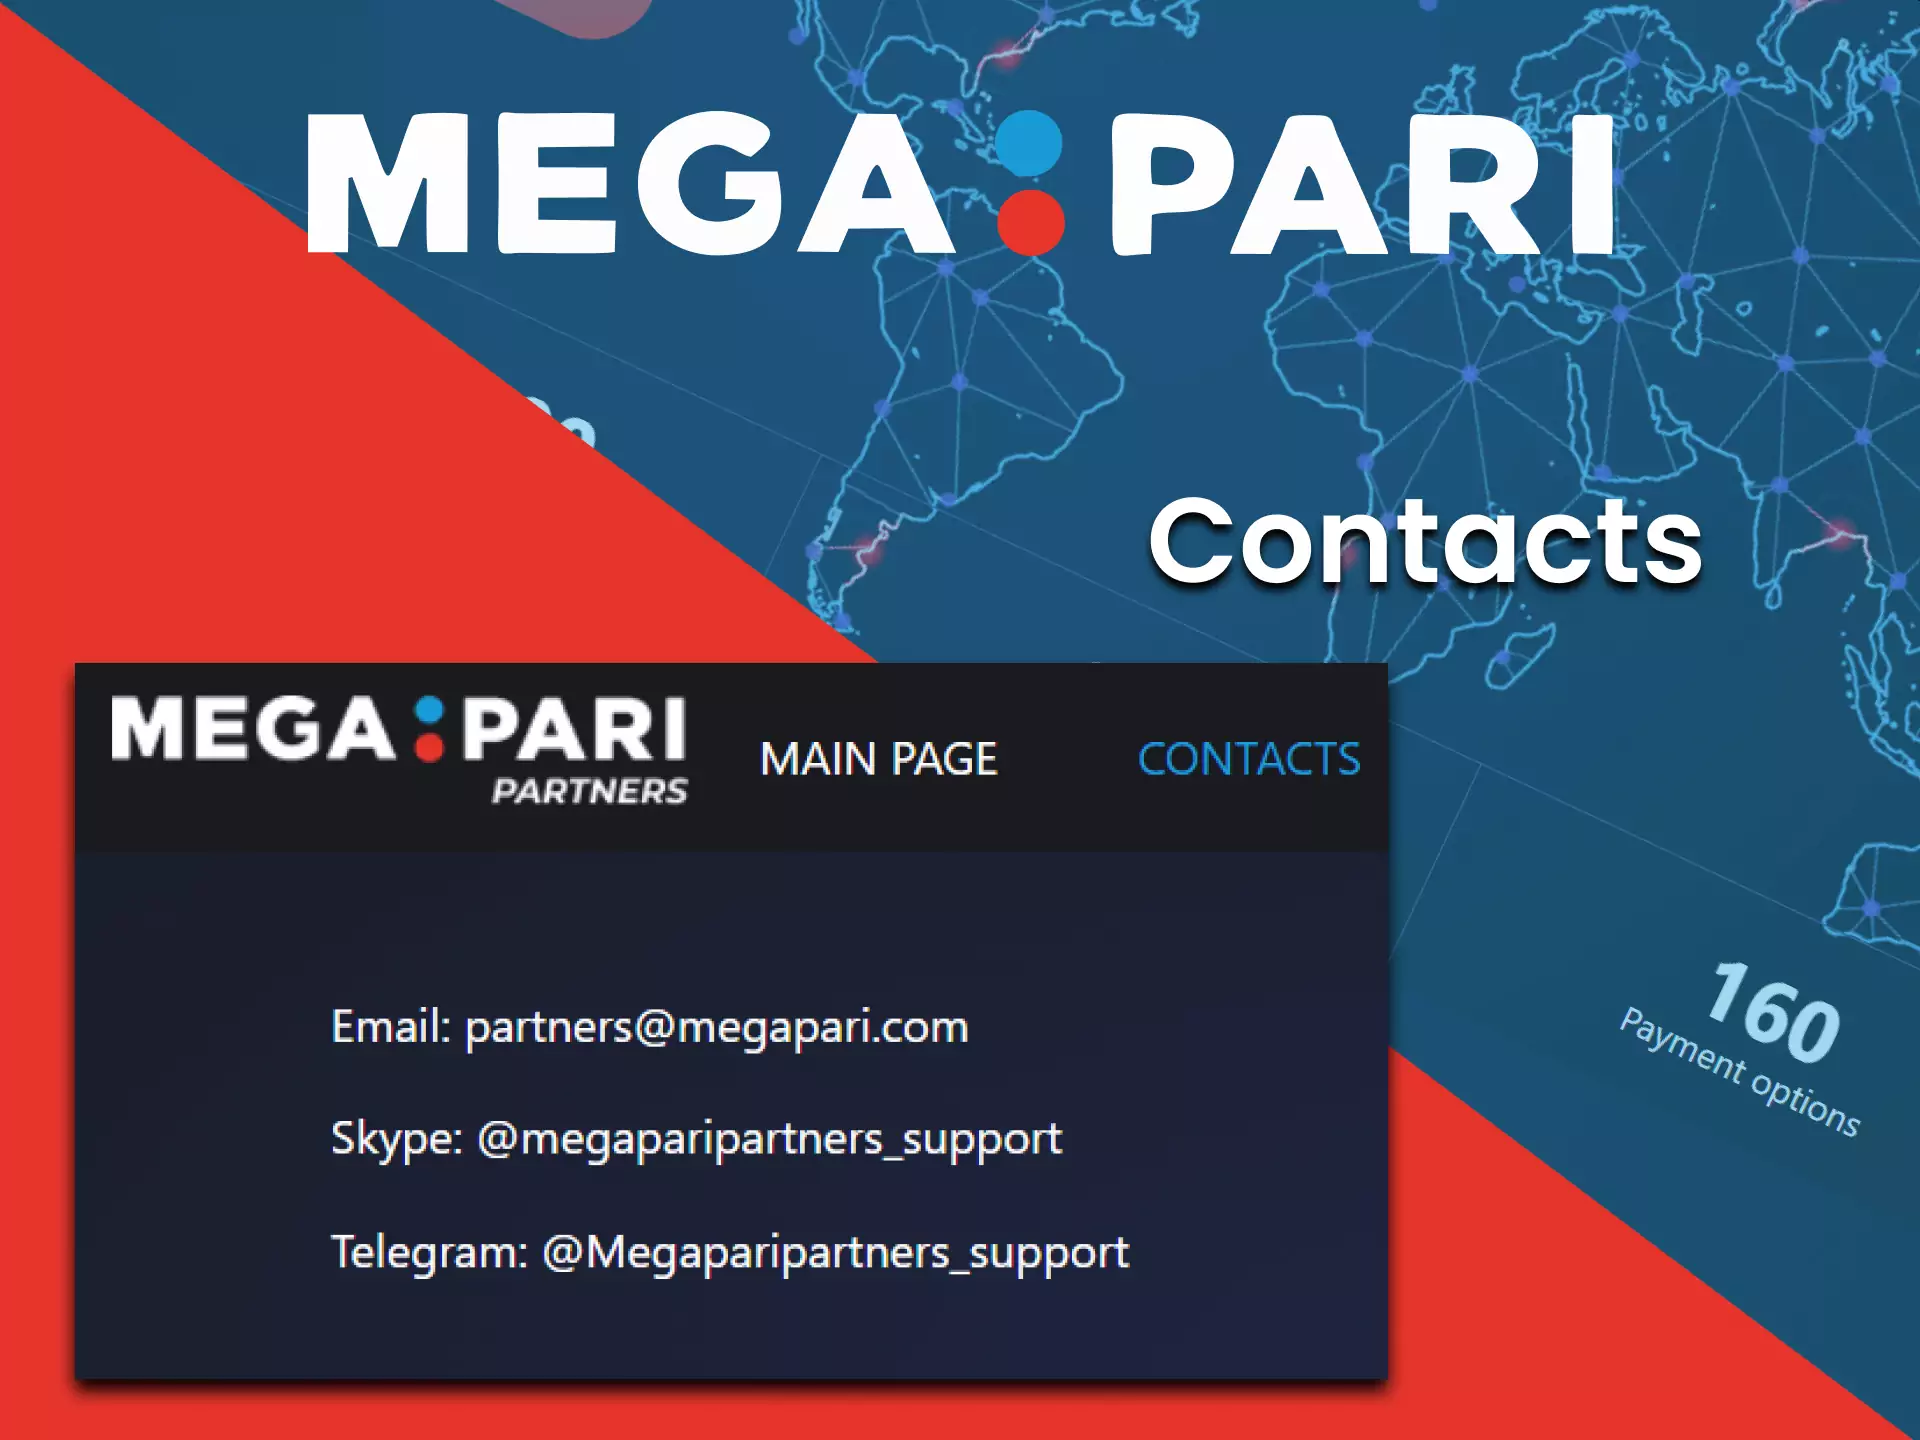 Remember the contact list of the Megapari affiliate club.